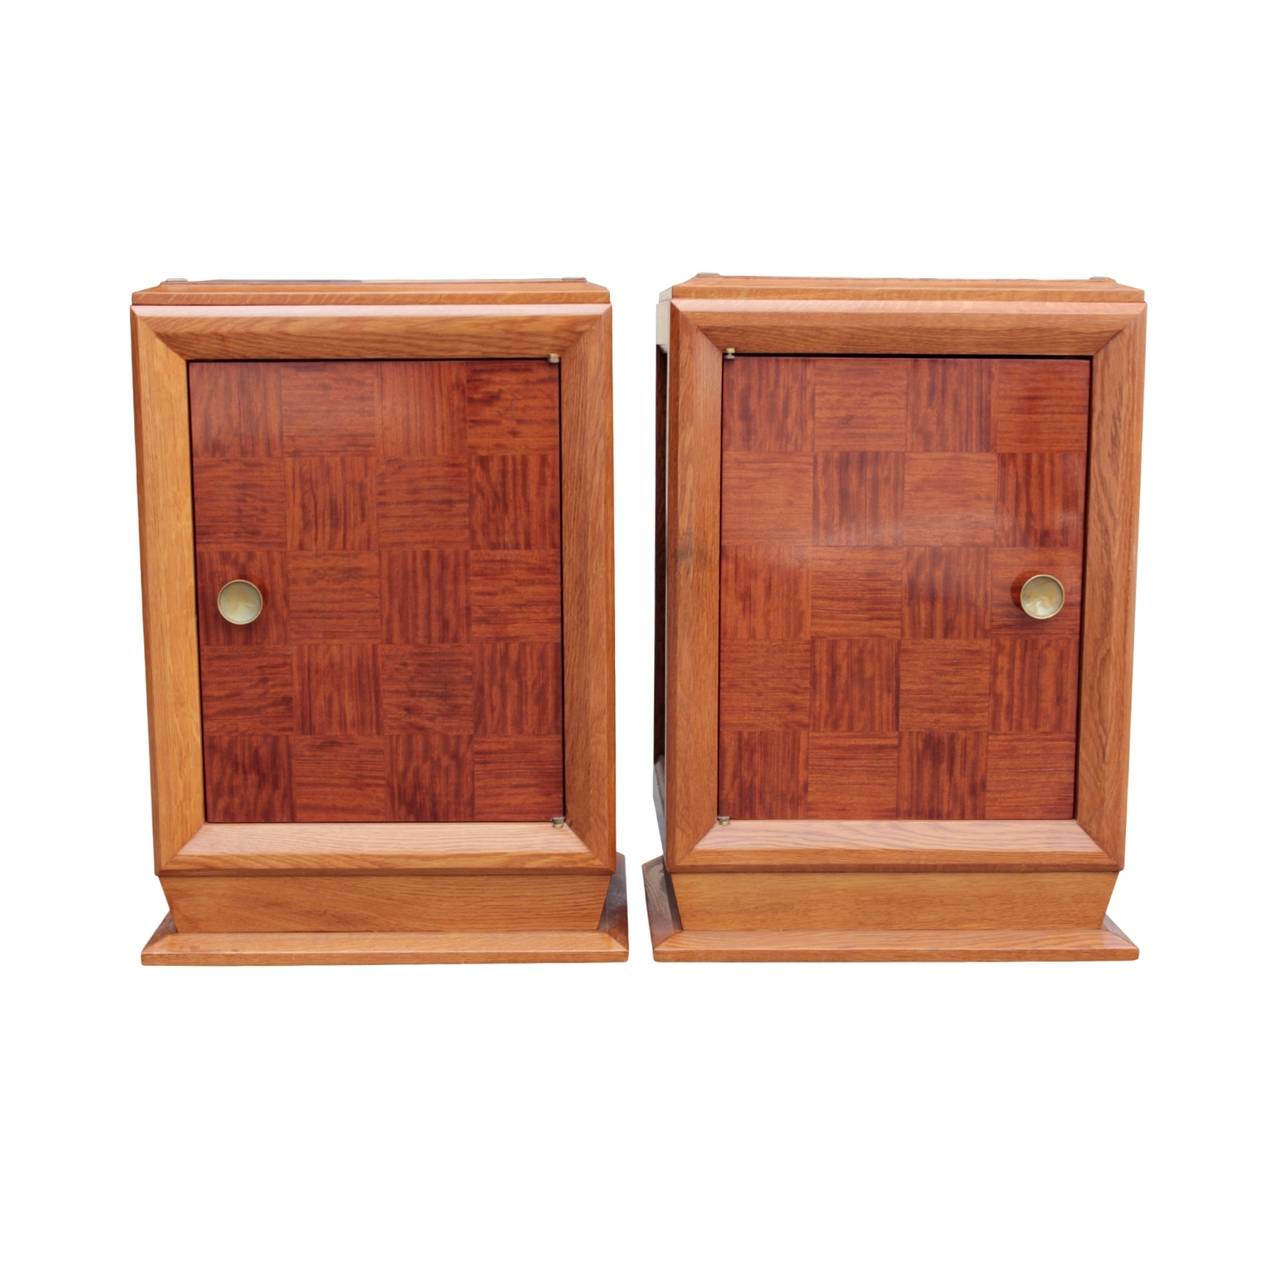 Pair of French Art Deco period nightstands, attributed to Louis Majorelle In Excellent Condition For Sale In Hudson, NY